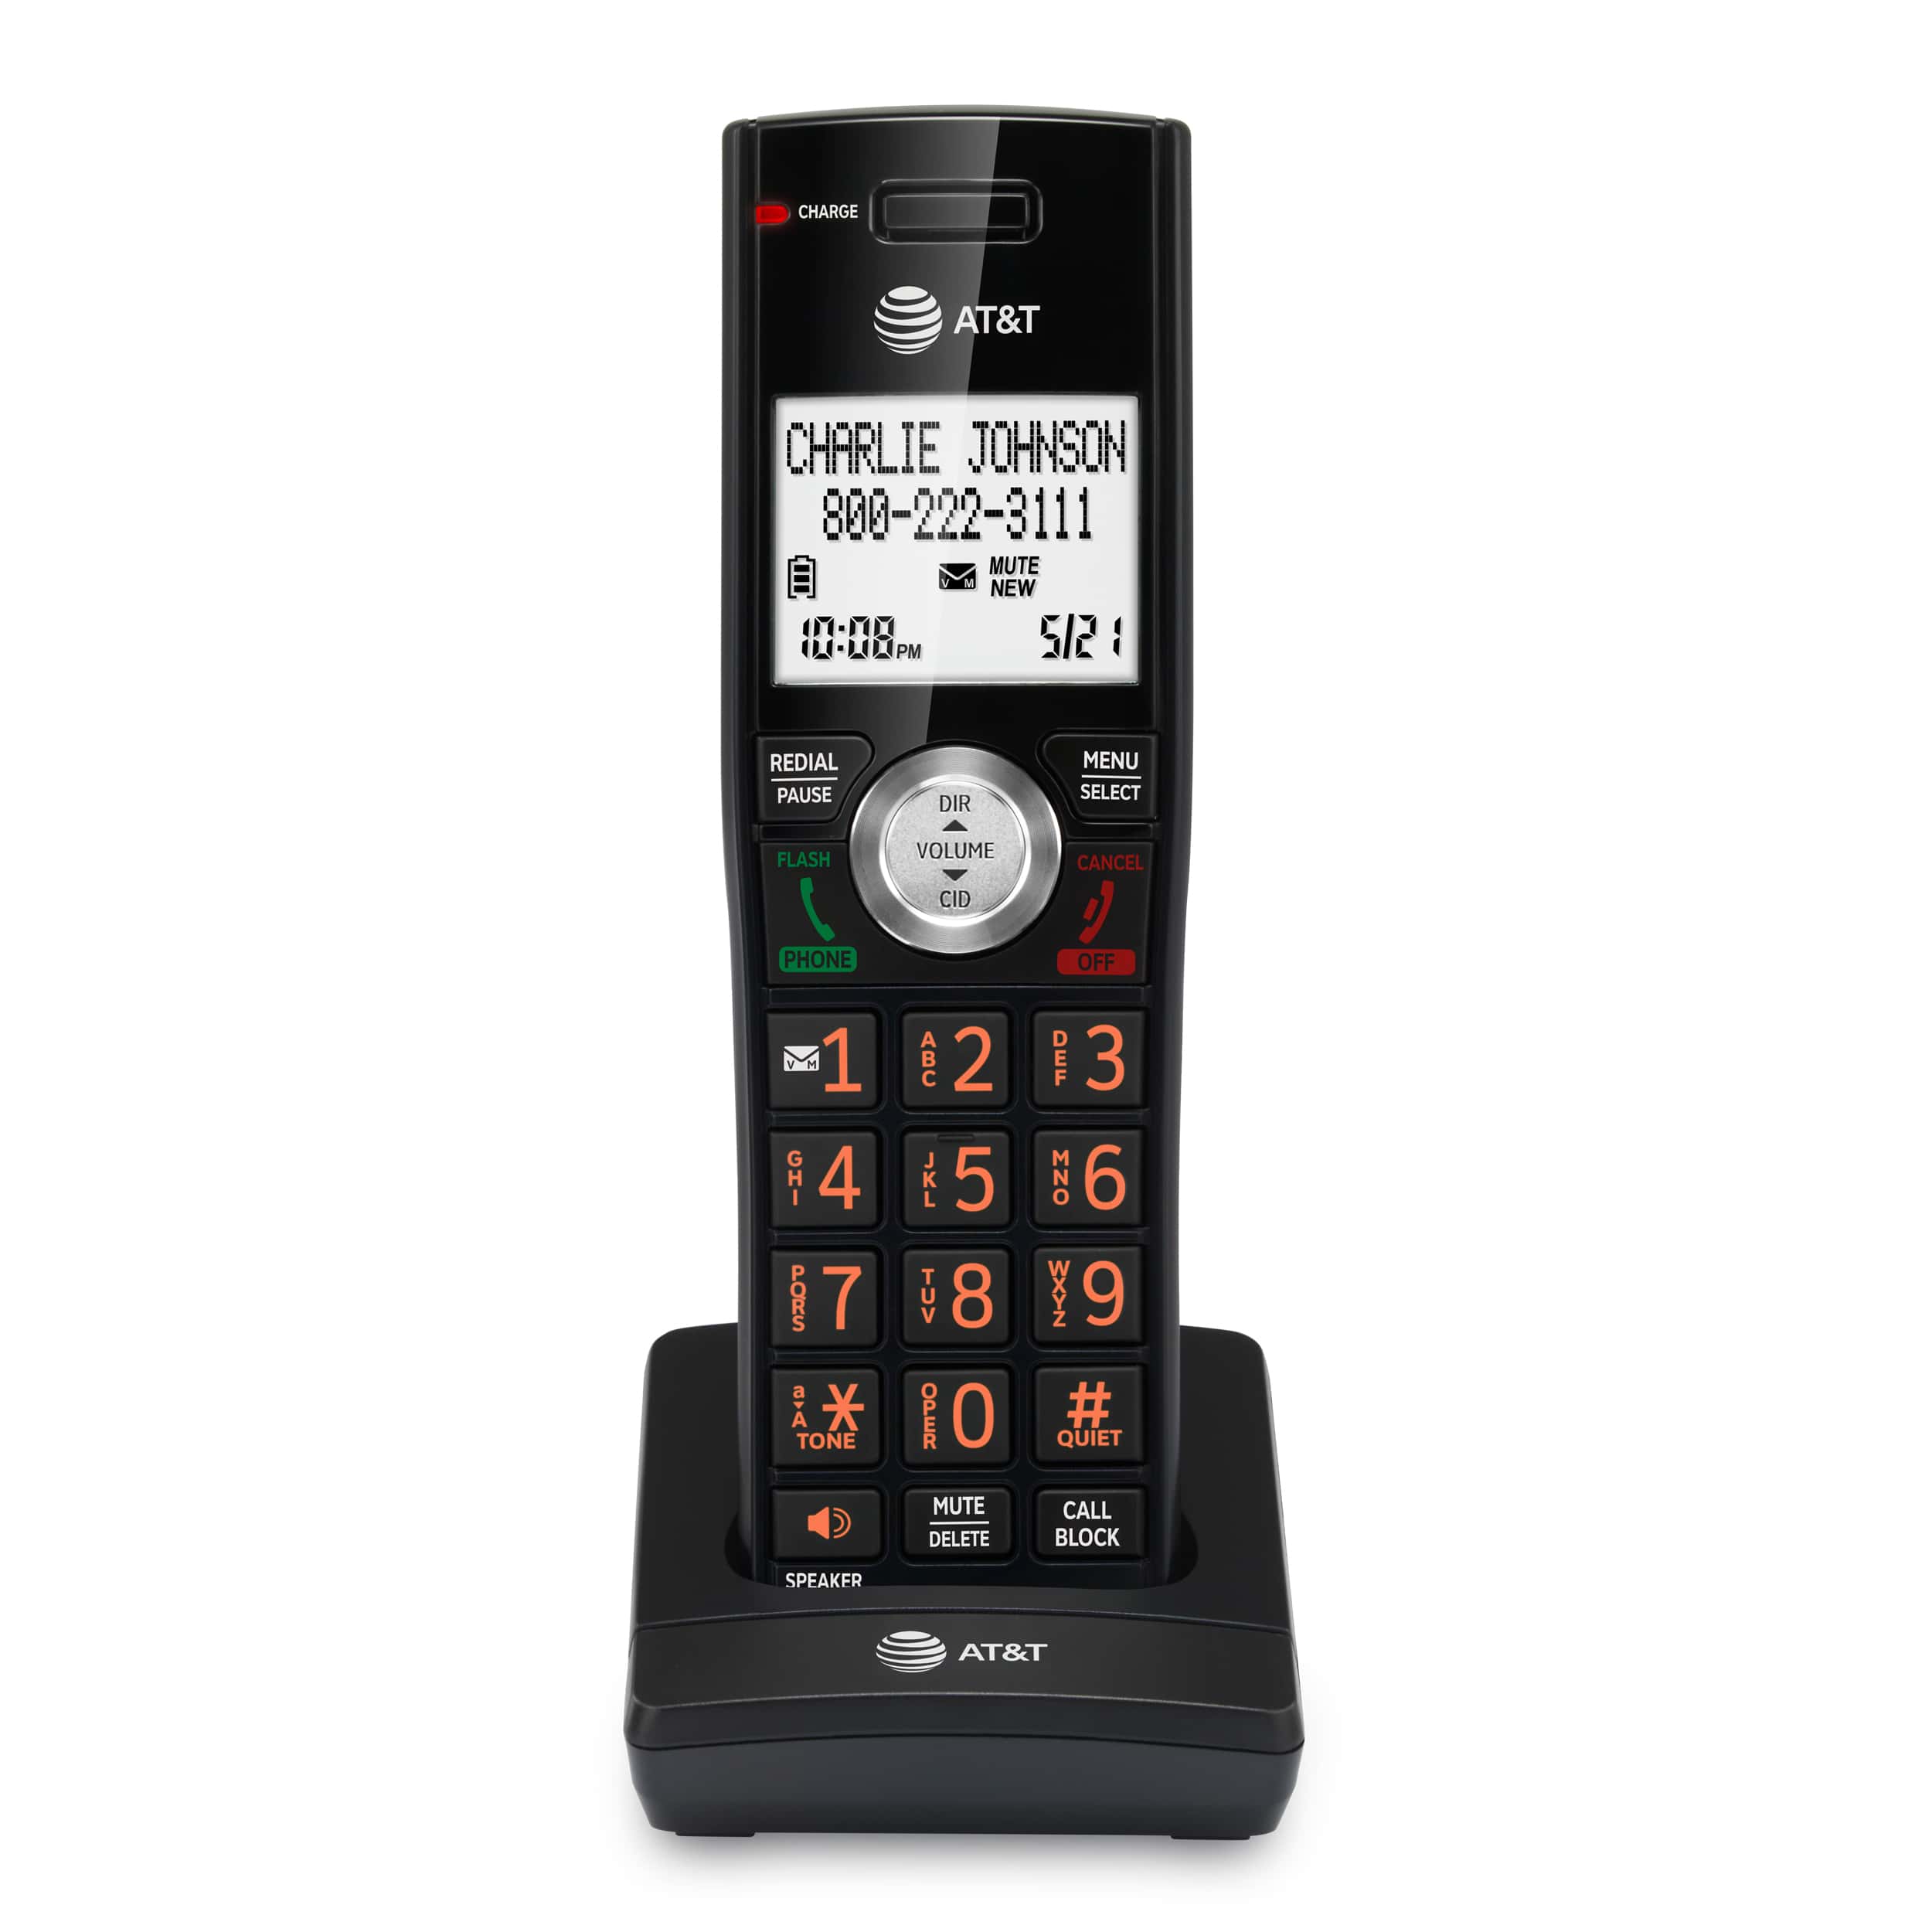 Cordless Accessory Handset for AT&T CL82207, CL82267, CL82307, CL82367, CL82407, CL83207, CL83407, CL84107, and CL84207 - view 1